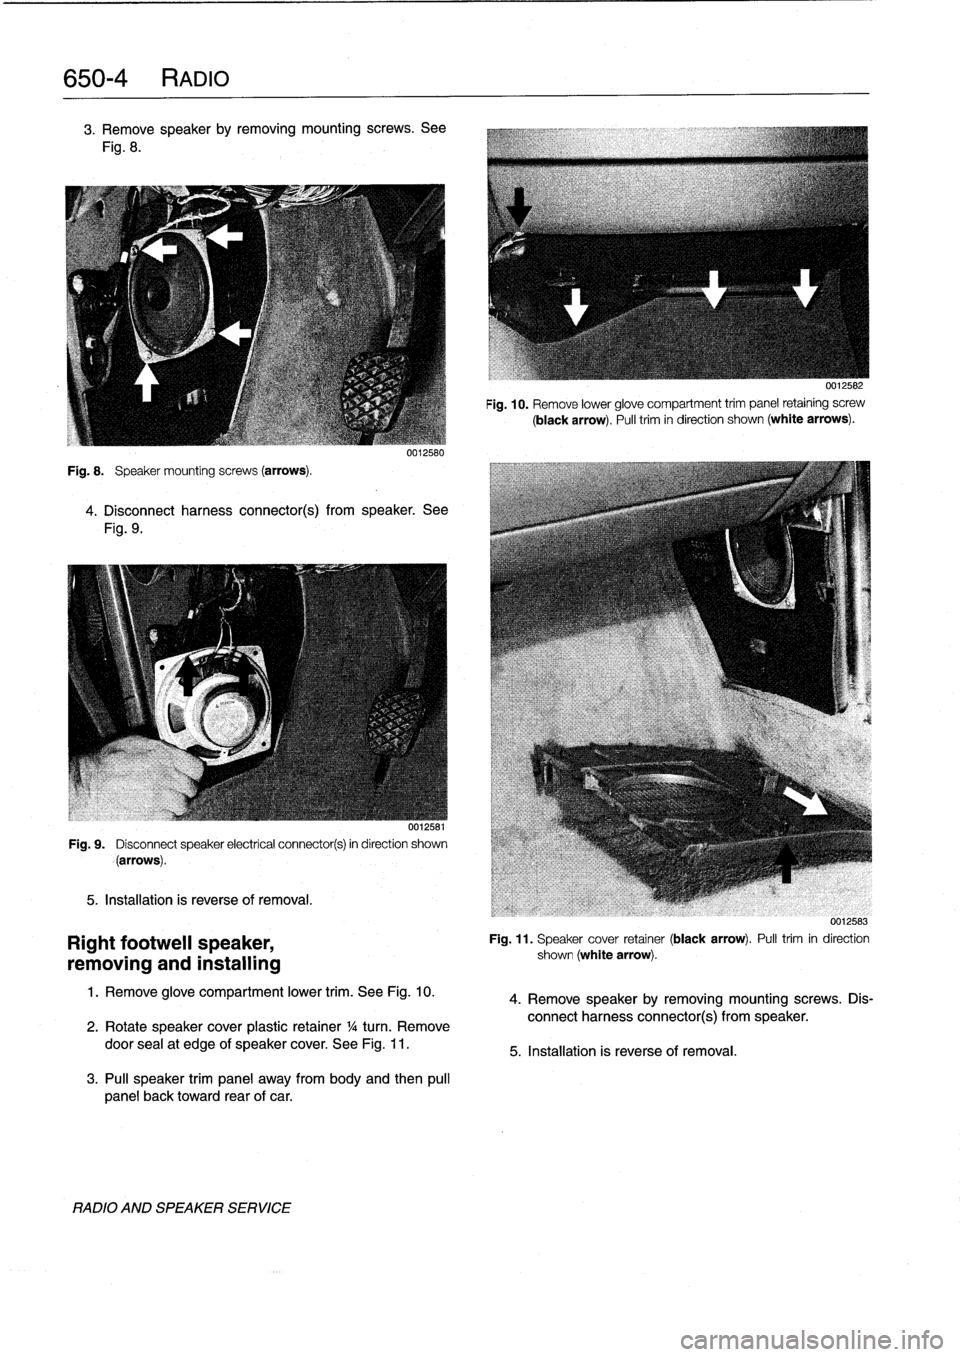 BMW M3 1996 E36 User Guide 
650-
4
RADIO

3
.
Remove
speakerby
removing
mountingscrews
.
See

Fig
.
8
.

Fig
.
8
.

	

Speaker
mounting
screws
(arrows)
.

0012580

4
.
Disconnect
harness
connector(s)
from
speaker
.
See

Fig
.
9